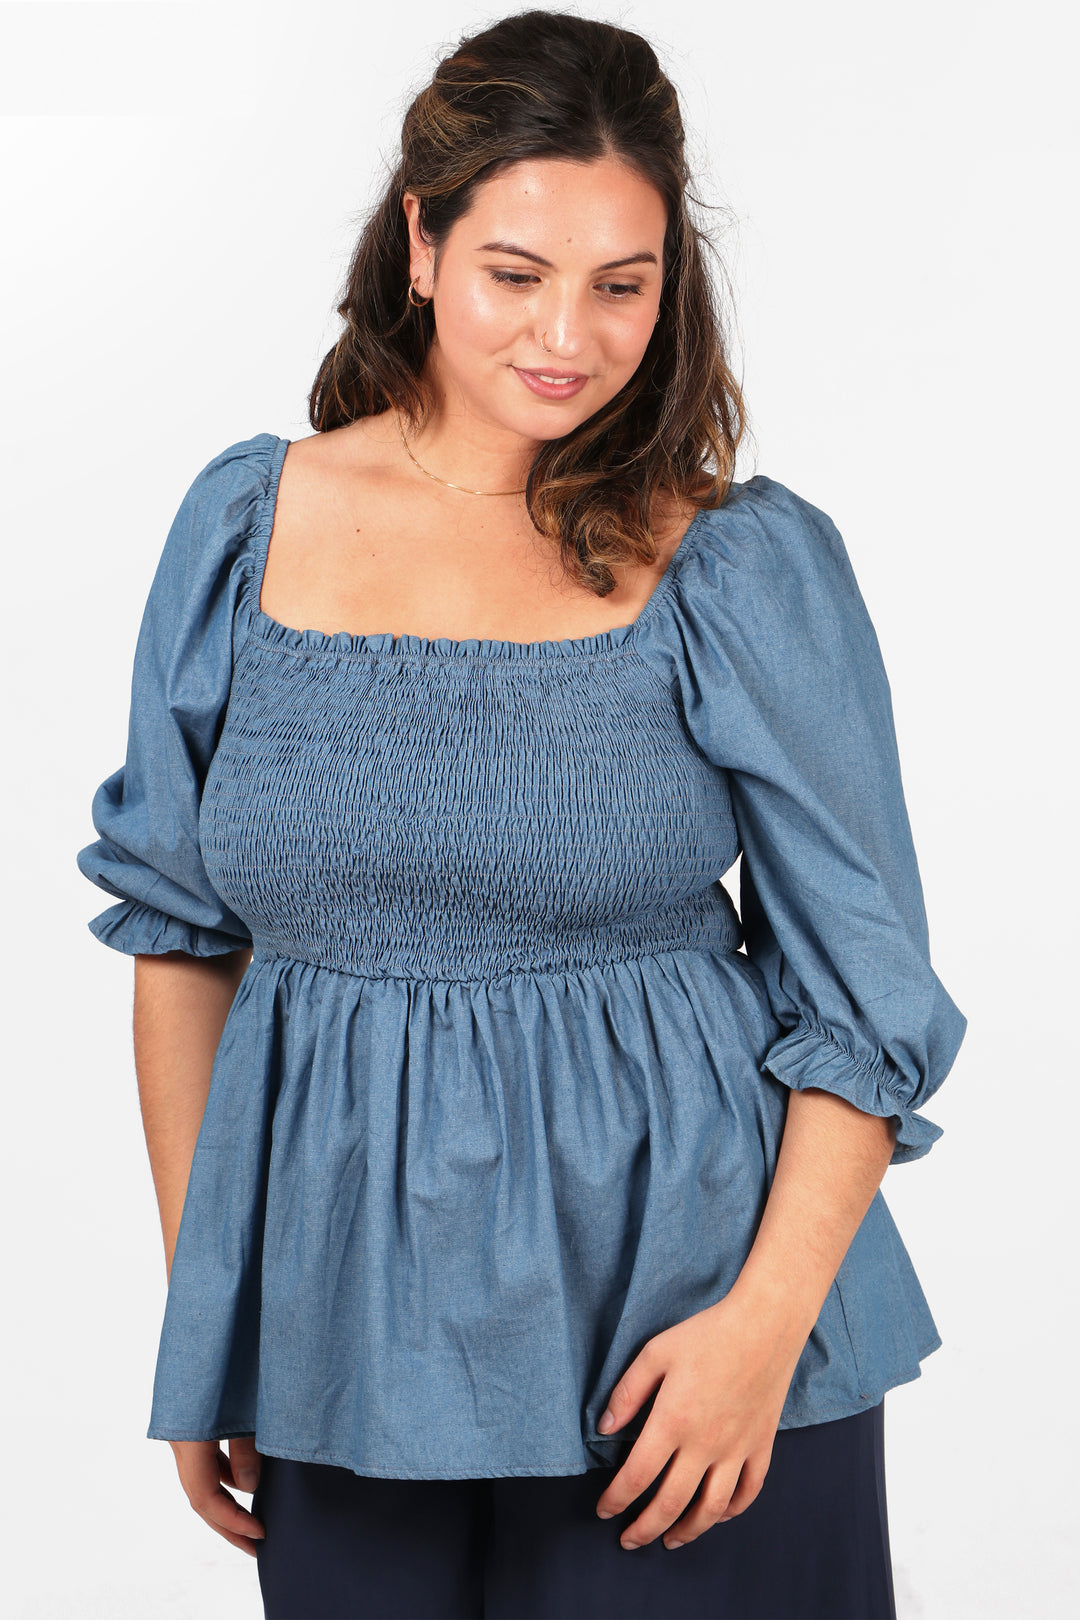 blue milkmaid style top in denim blue with a shirred bodice and 3/4 sleeves